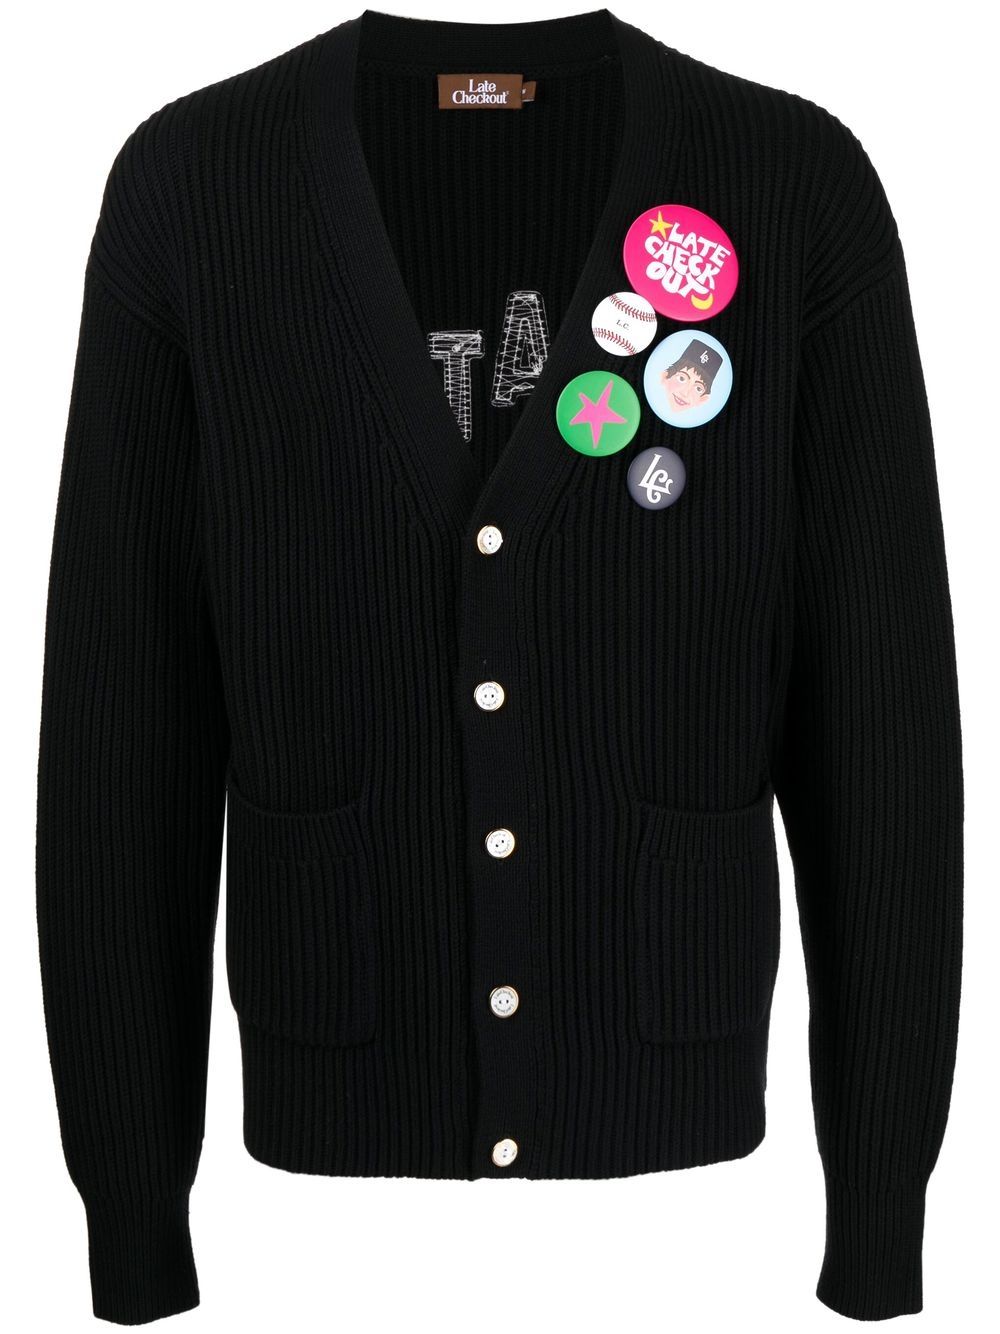 LATE CHECKOUT LOGO-EMBROIDERED CHUNKY KNIT CARDIGAN